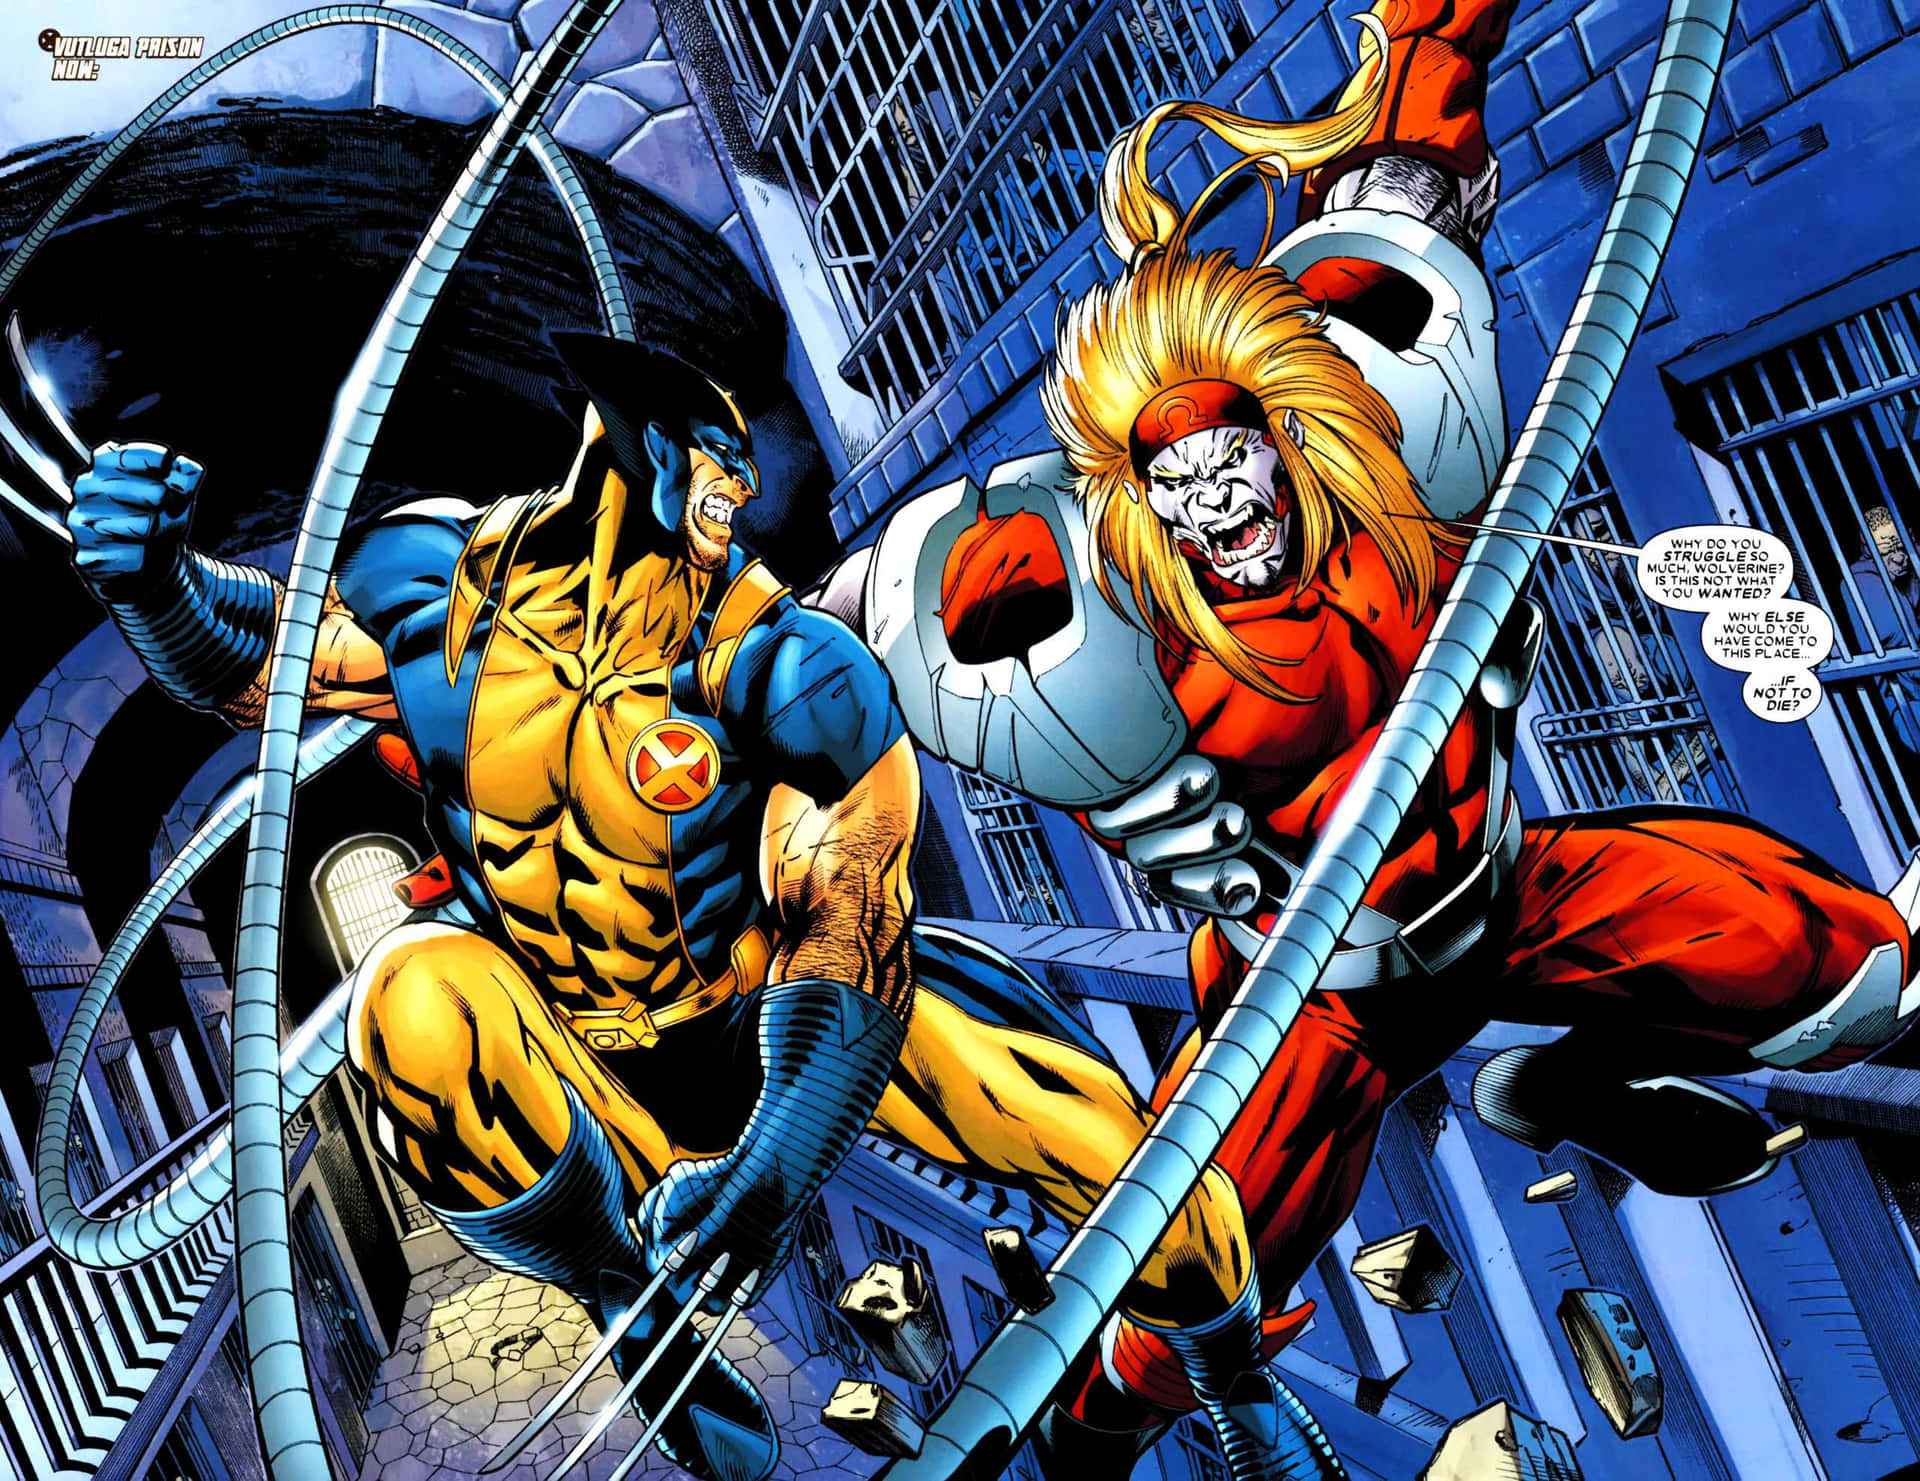 Omega Red in Action - A Marvel Comics Villain Wallpaper